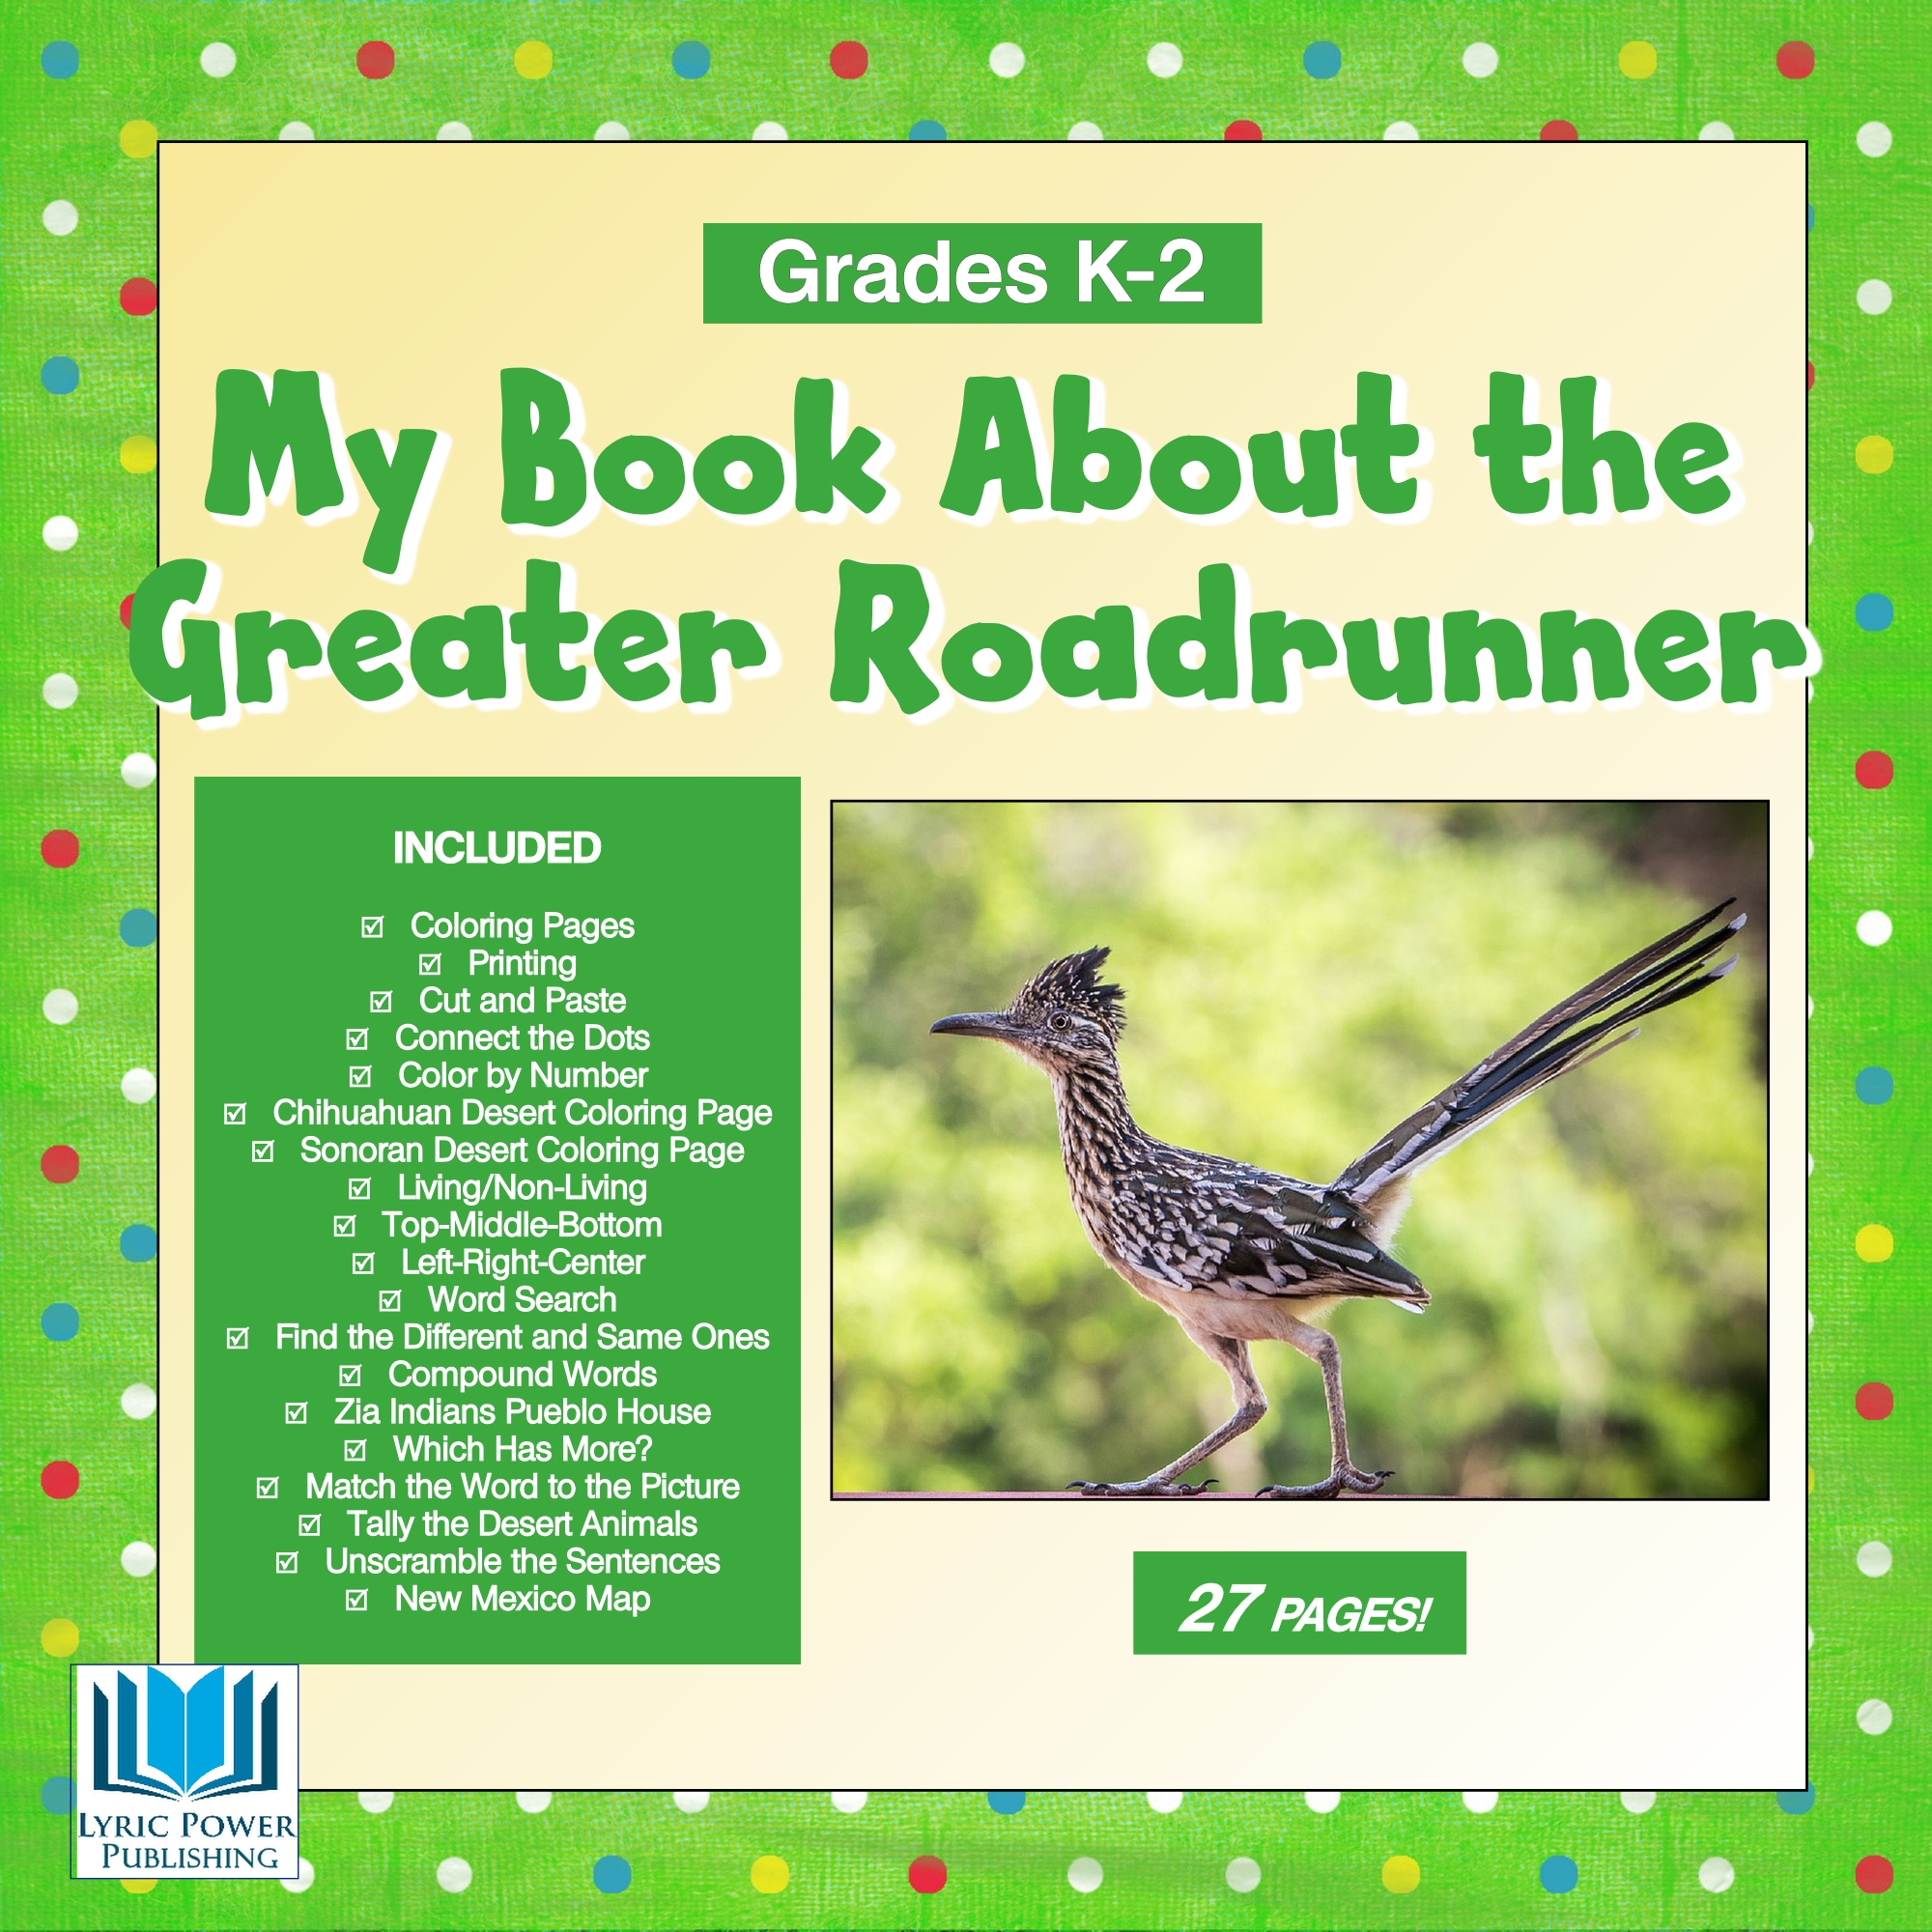 A green and yellow book cover with image of Greater Roadrunner